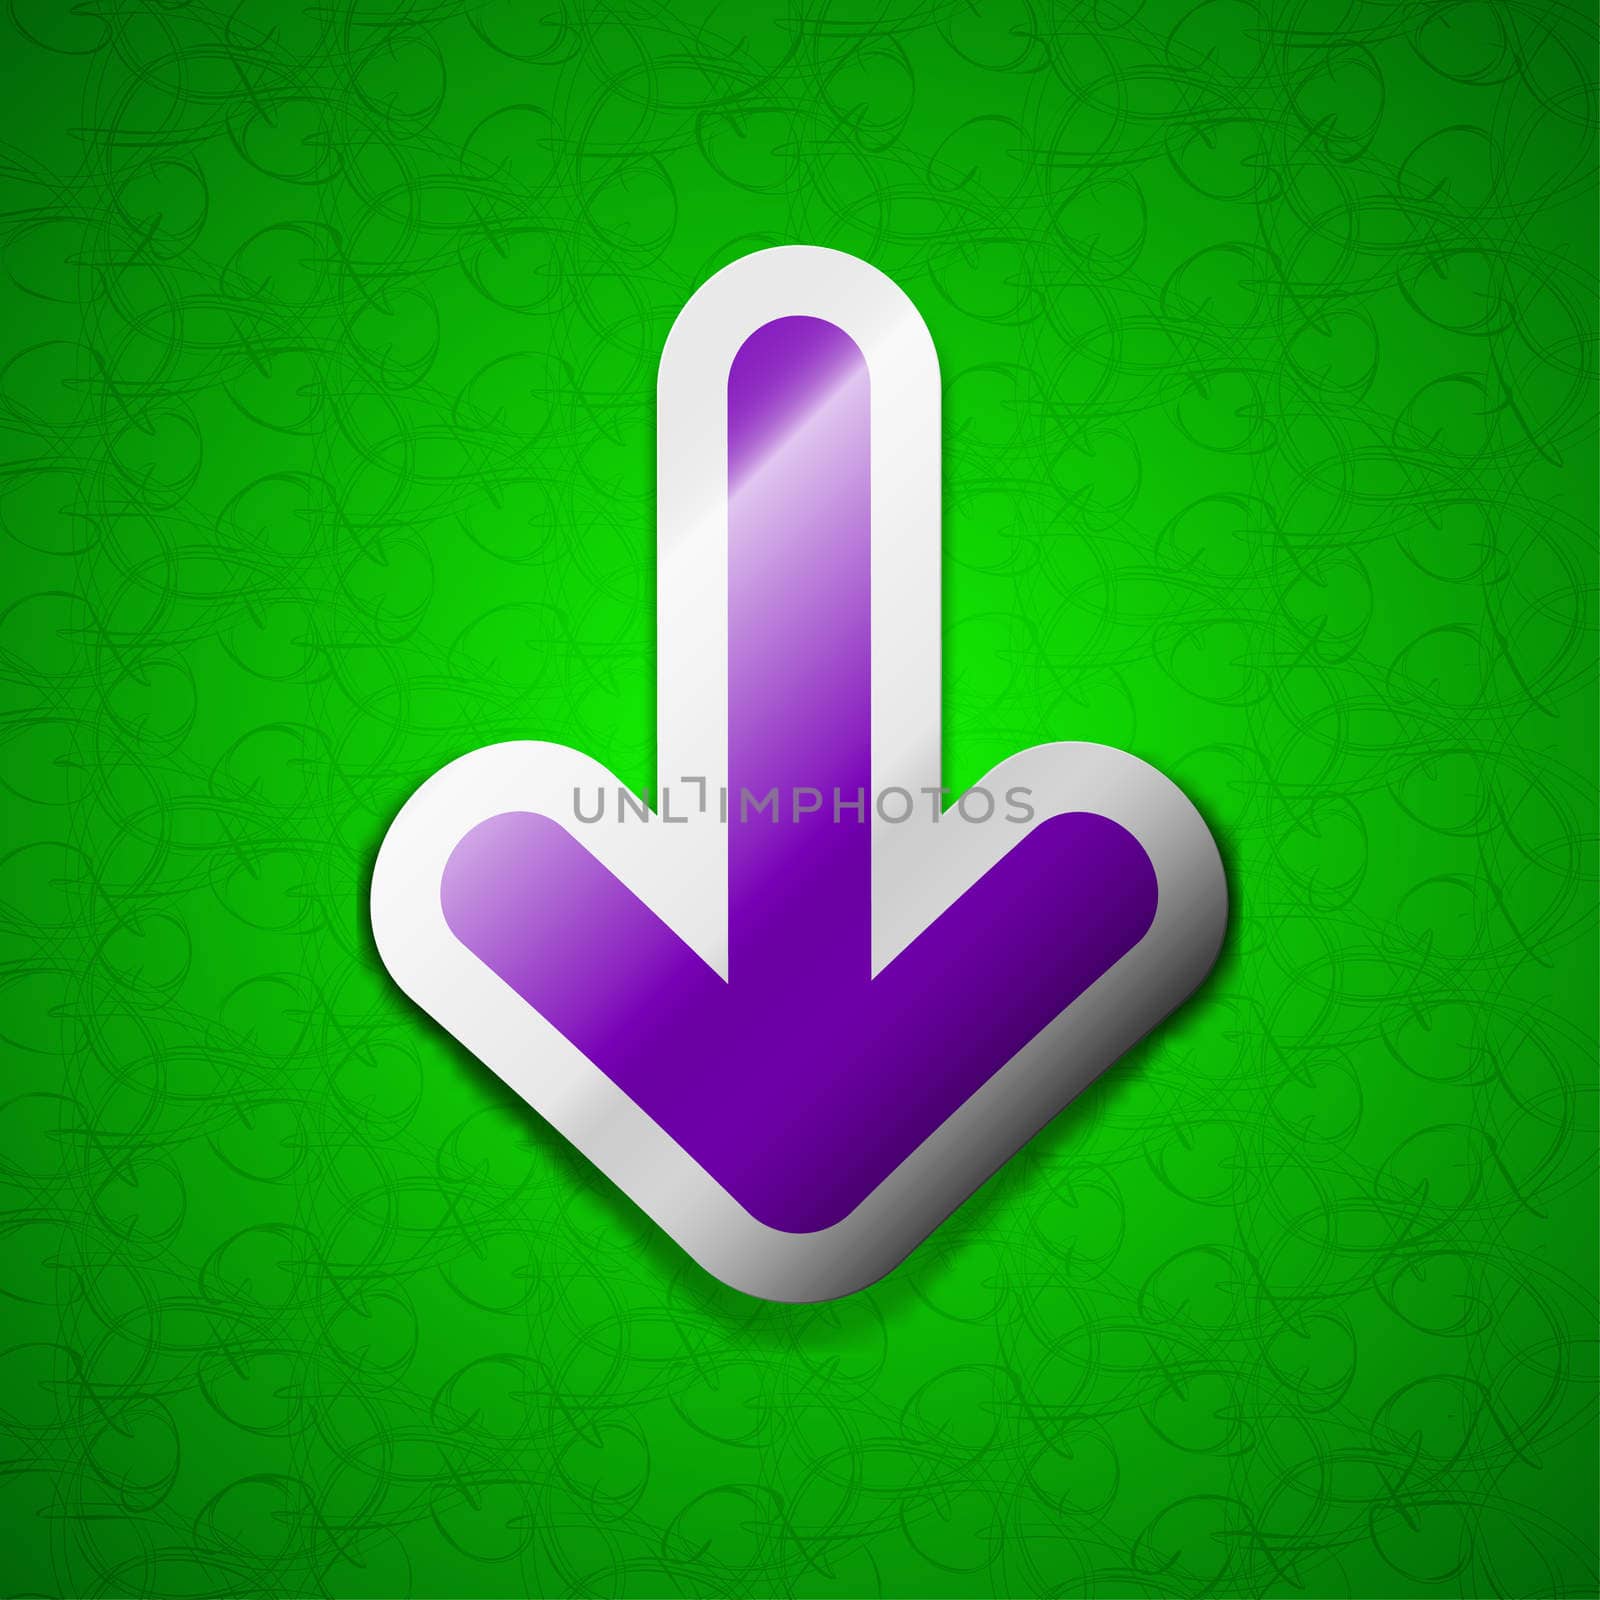 Arrow down, Download, Load, Backup icon sign. Symbol chic colored sticky label on green background. illustration